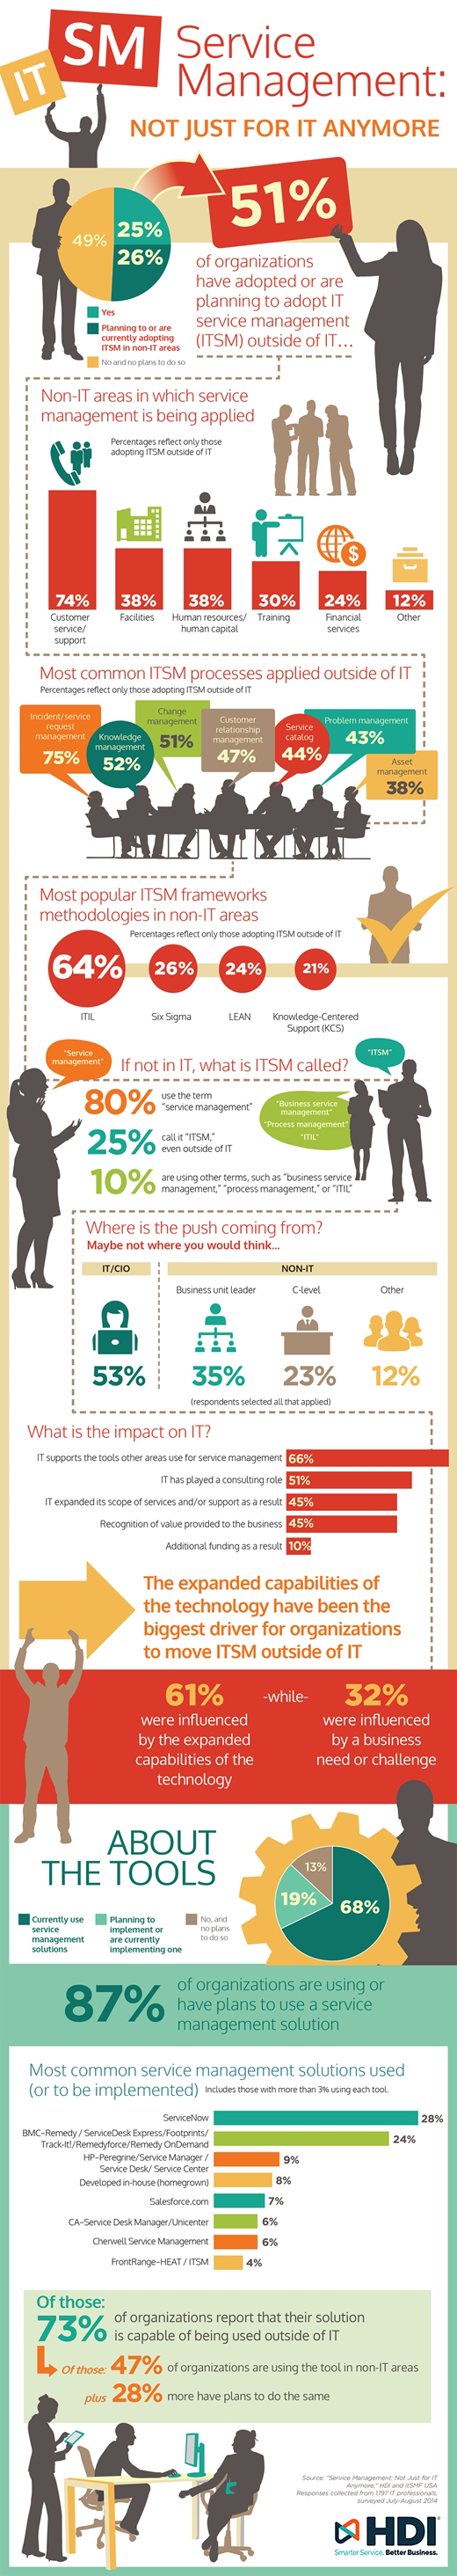 Service Management Not Just for IT Anymore infographic